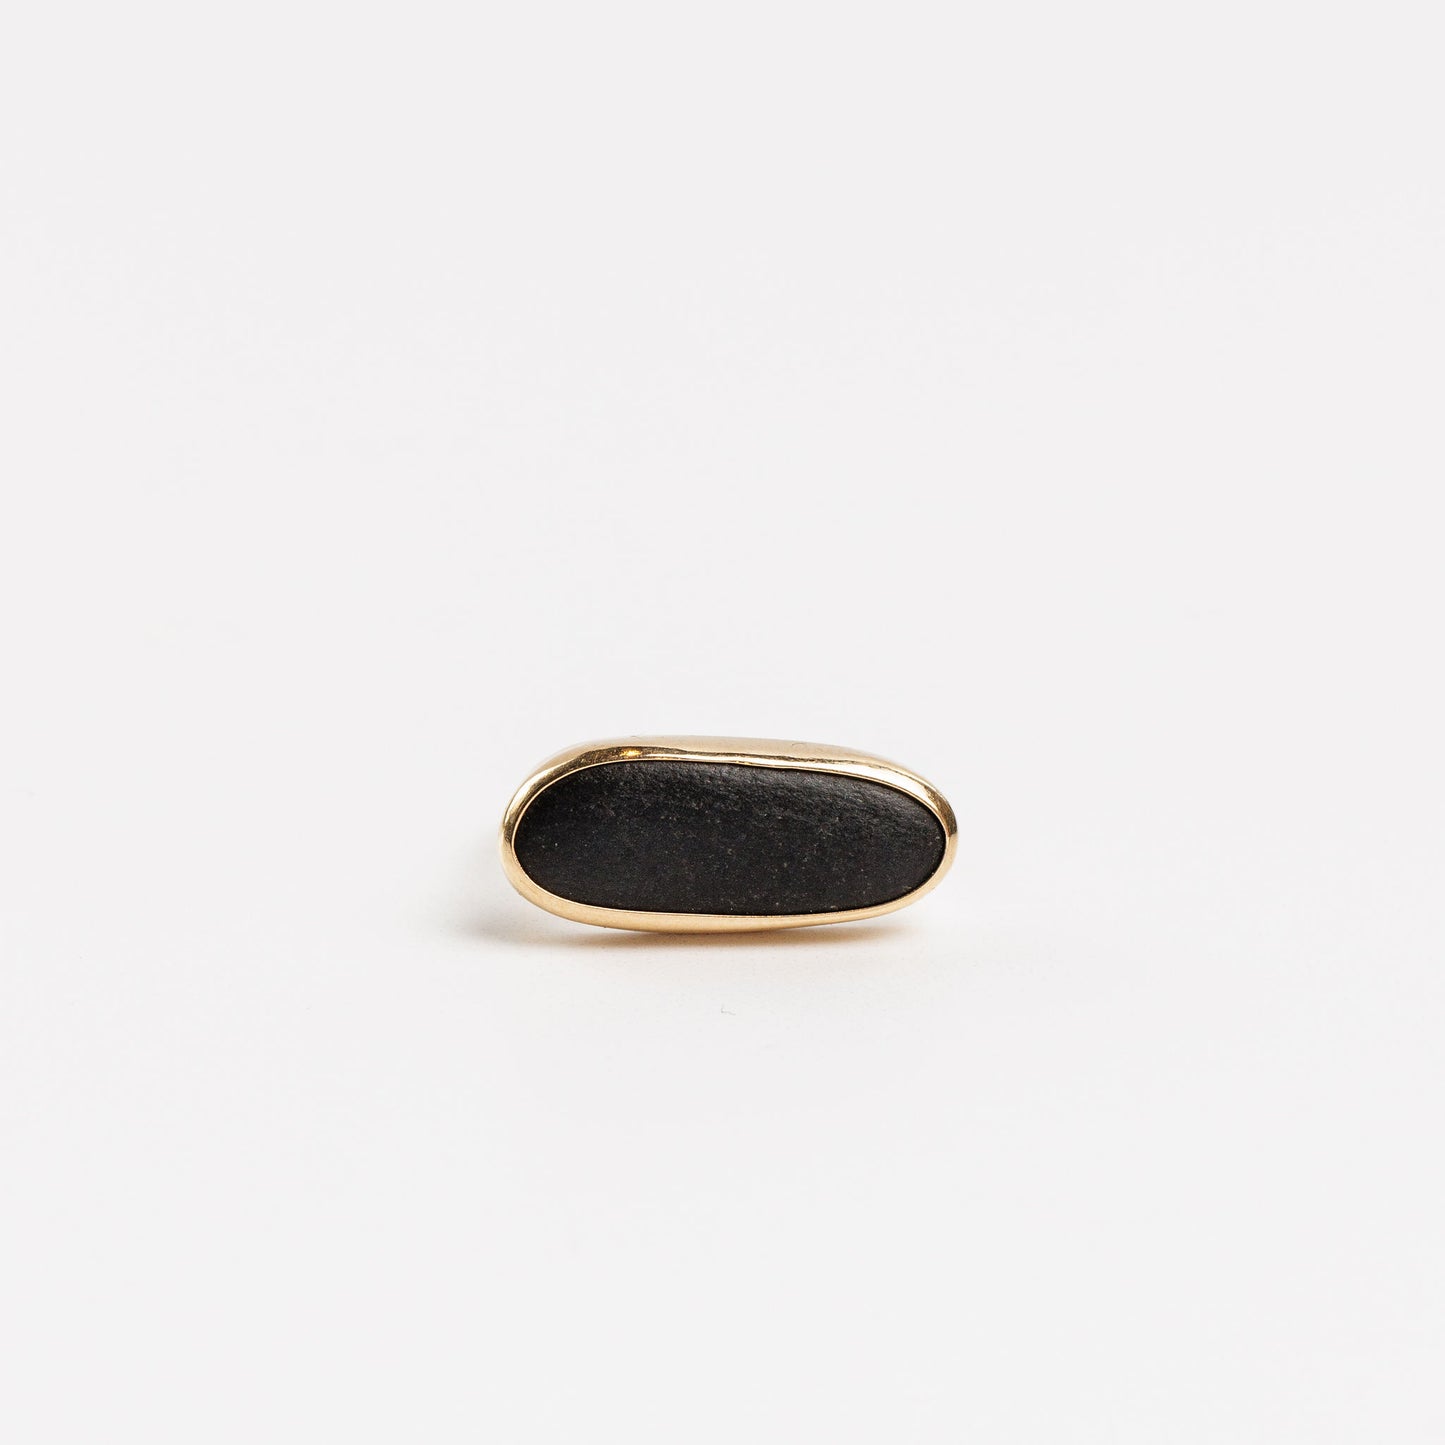 oval basat gem ring on a white background